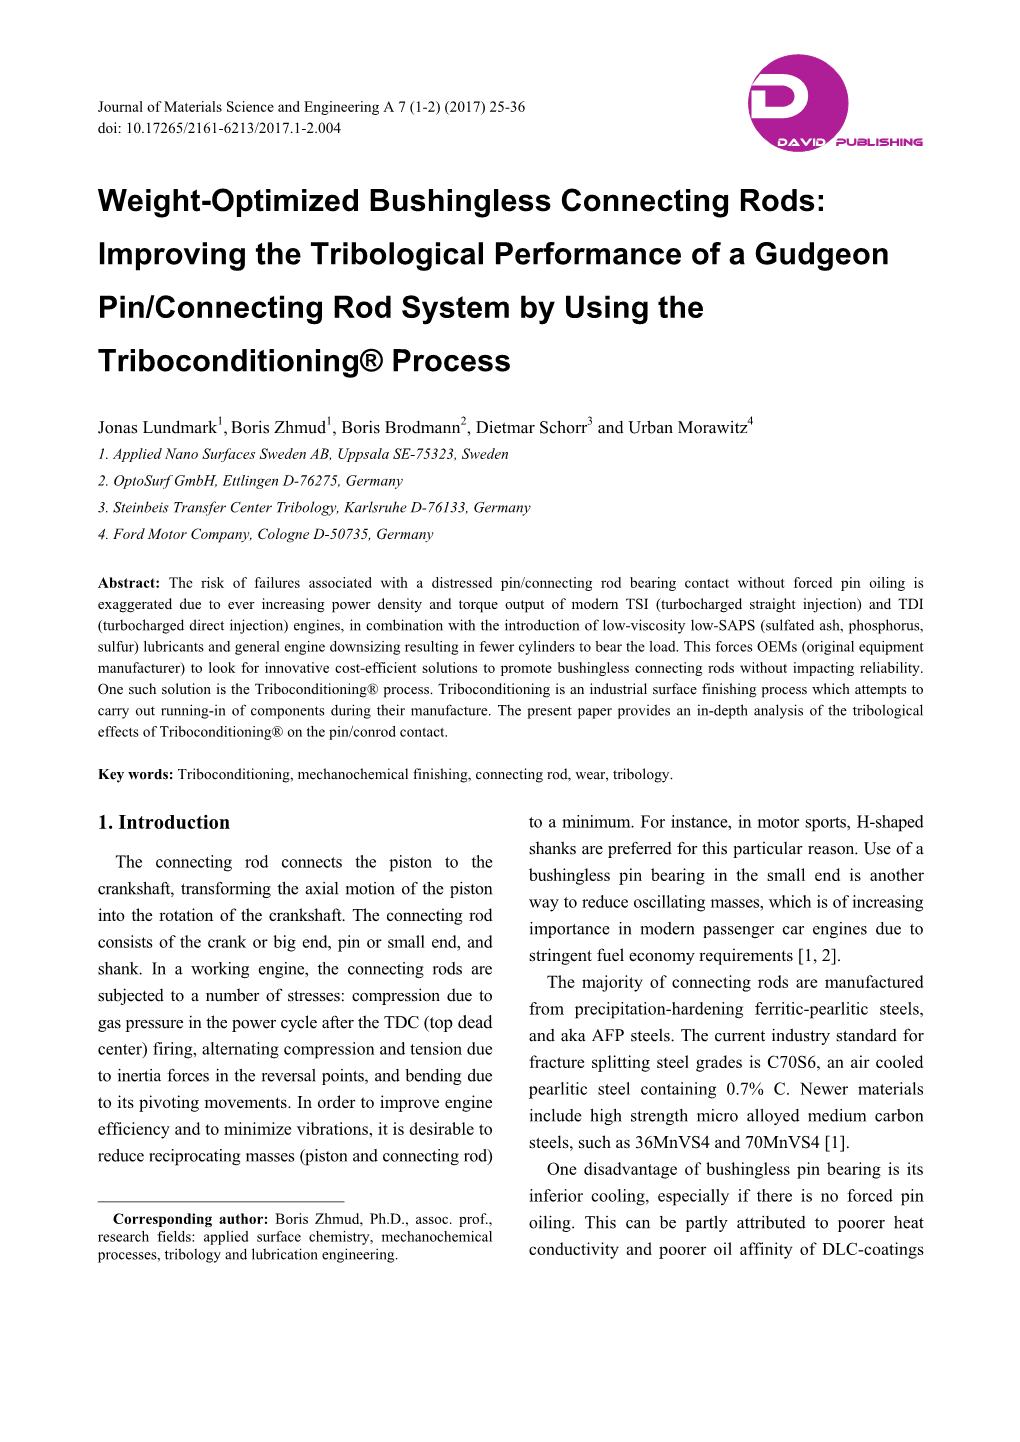 Weight-Optimized Bushingless Connecting Rods: Improving the Tribological Performance of a Gudgeon Pin/Connecting Rod System by Using the Triboconditioning® Process